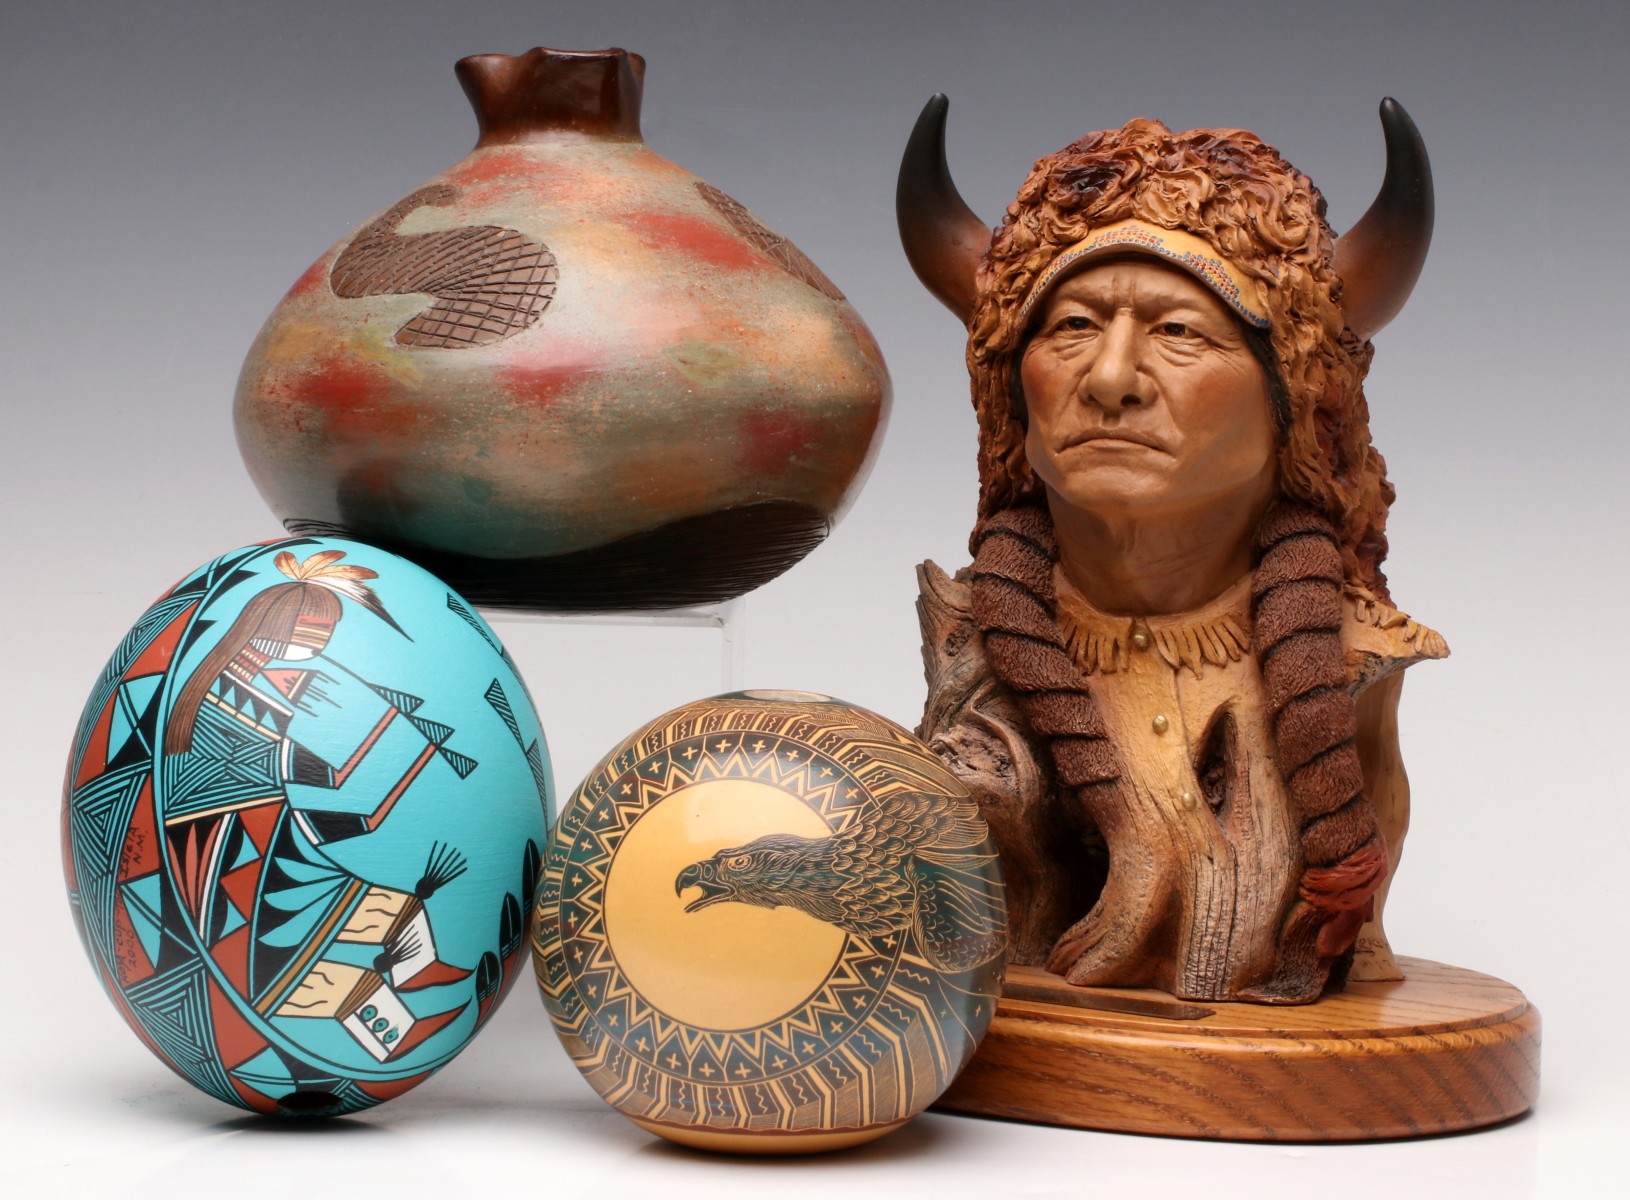 ARTIST SIGNED NATIVE AMERICAN POTTERY AND SCULPTURE